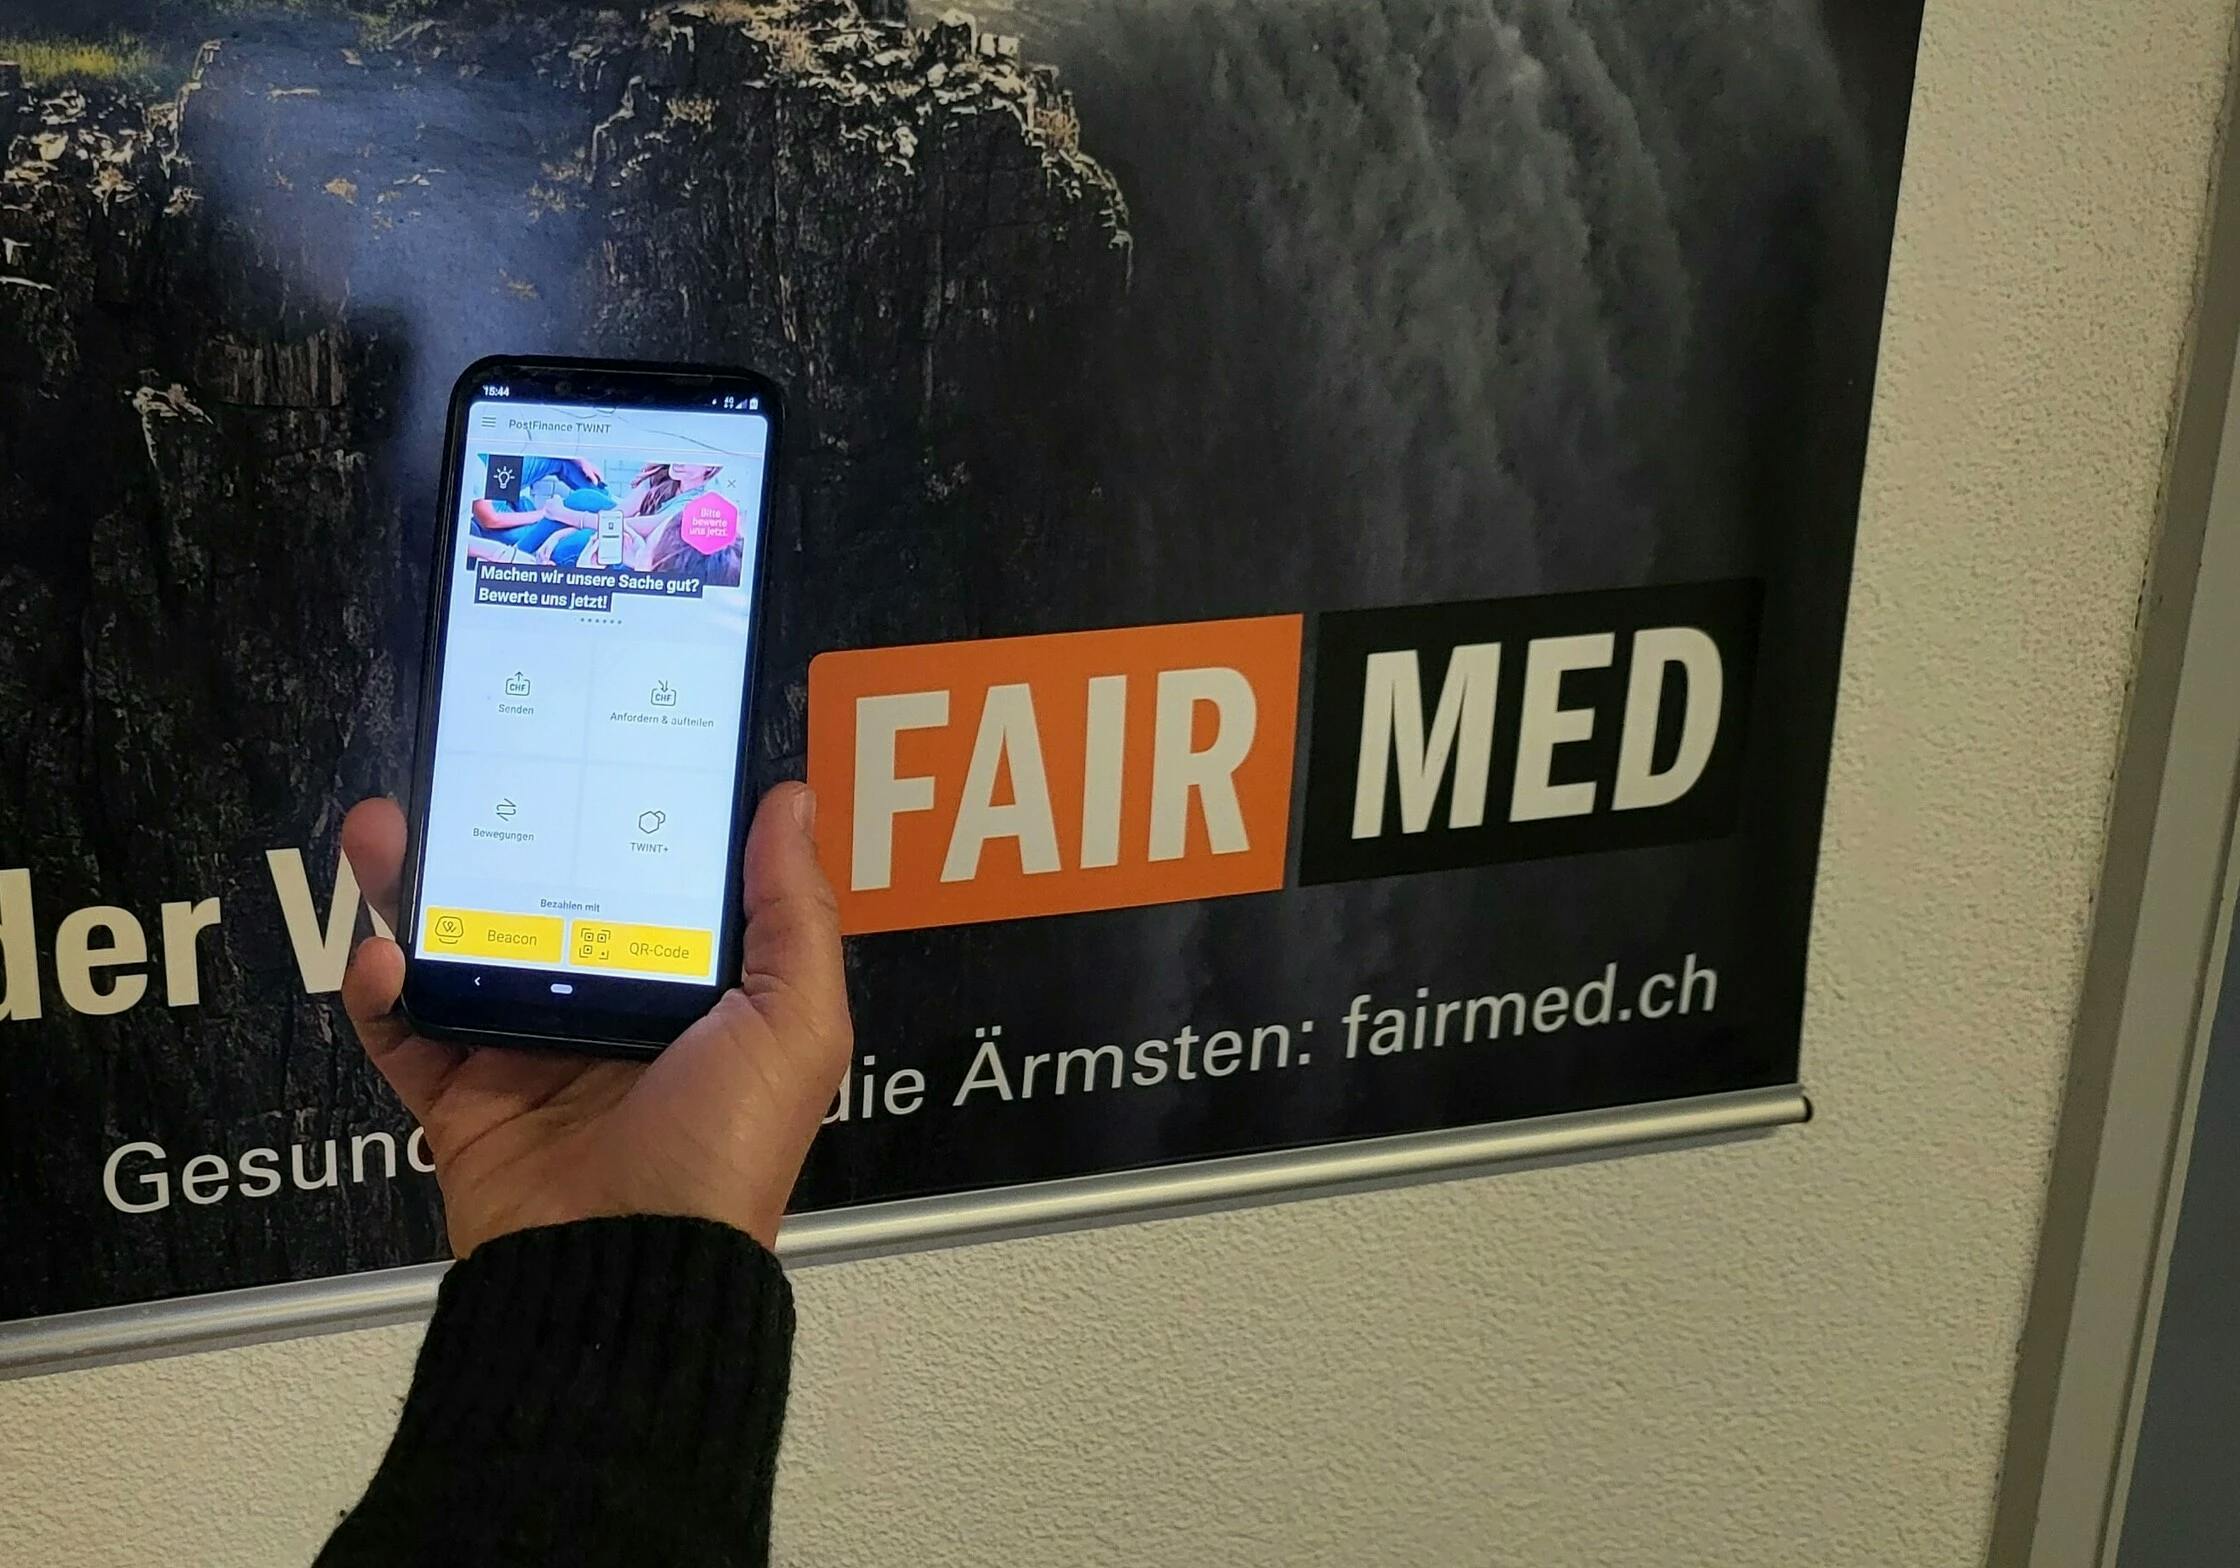 The picture shows a cell phone with the TWINT app open. In the background you can see a large FAIRMED poster.